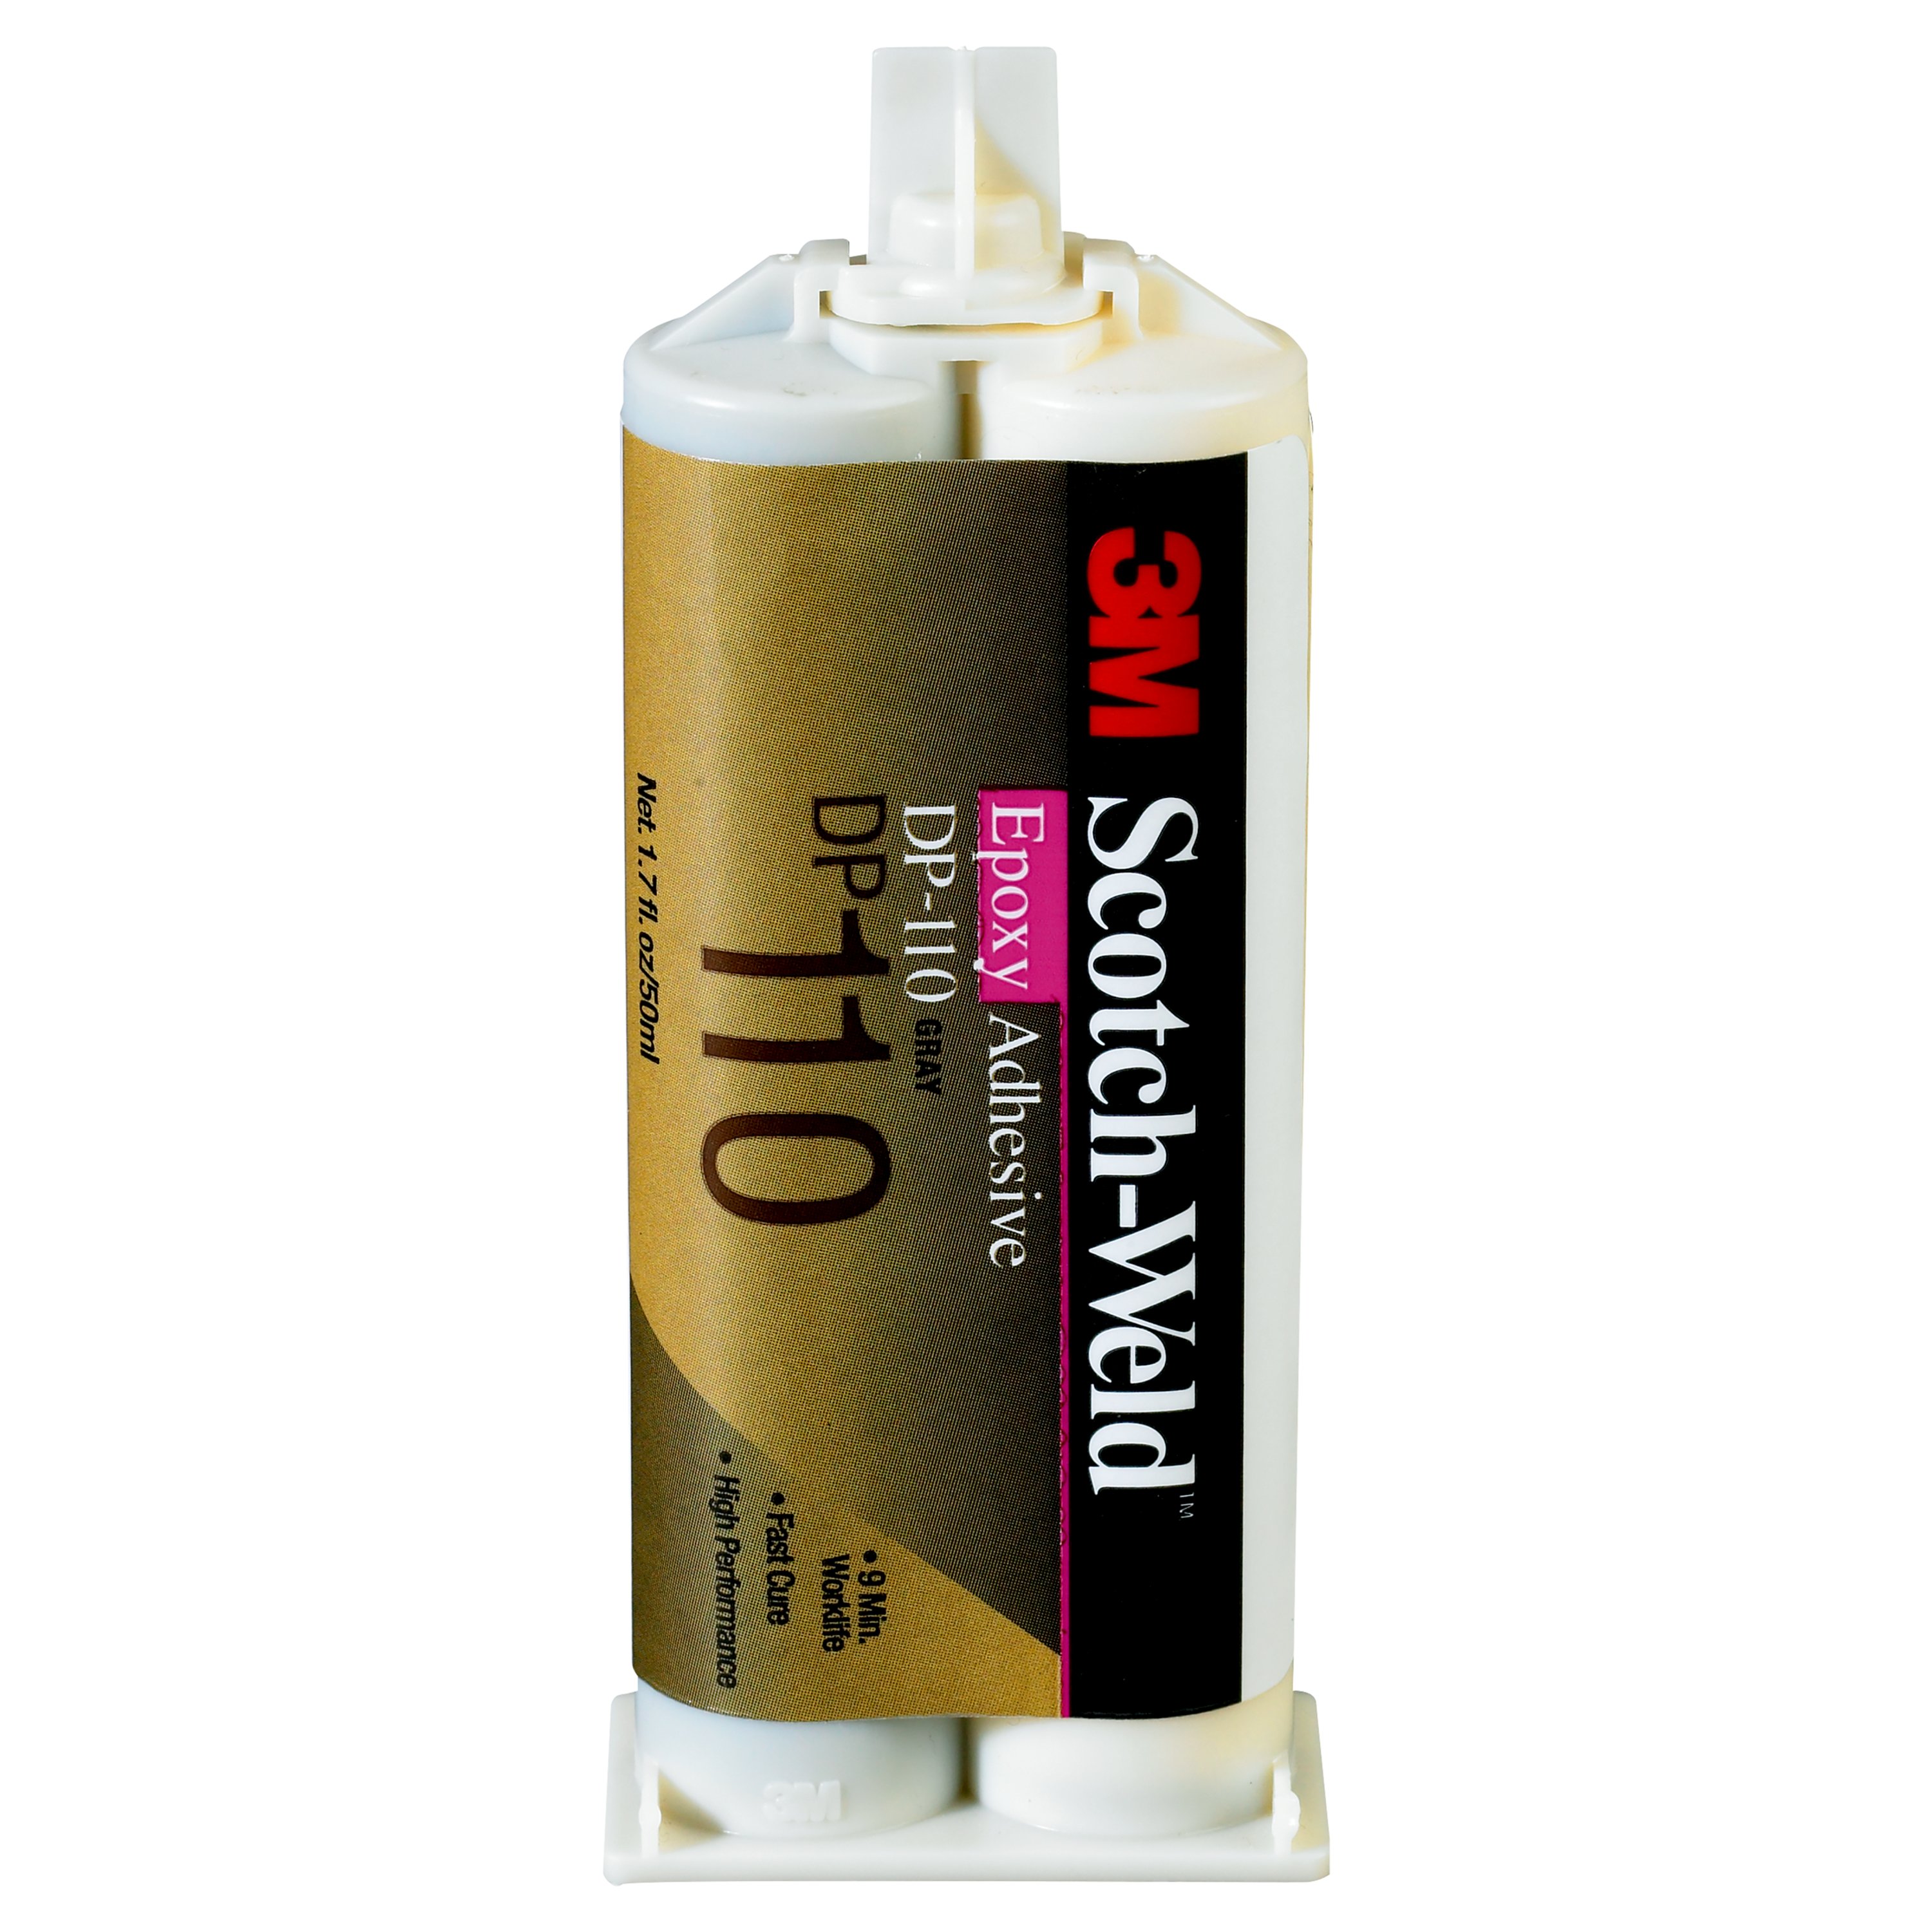 3M™ Scotch-Weld™ Epoxy Adhesive  DP110 Translucent is a versatile product and works on a variety of substrates including metals, concrete, composites, ceramics, many plastics and wood.